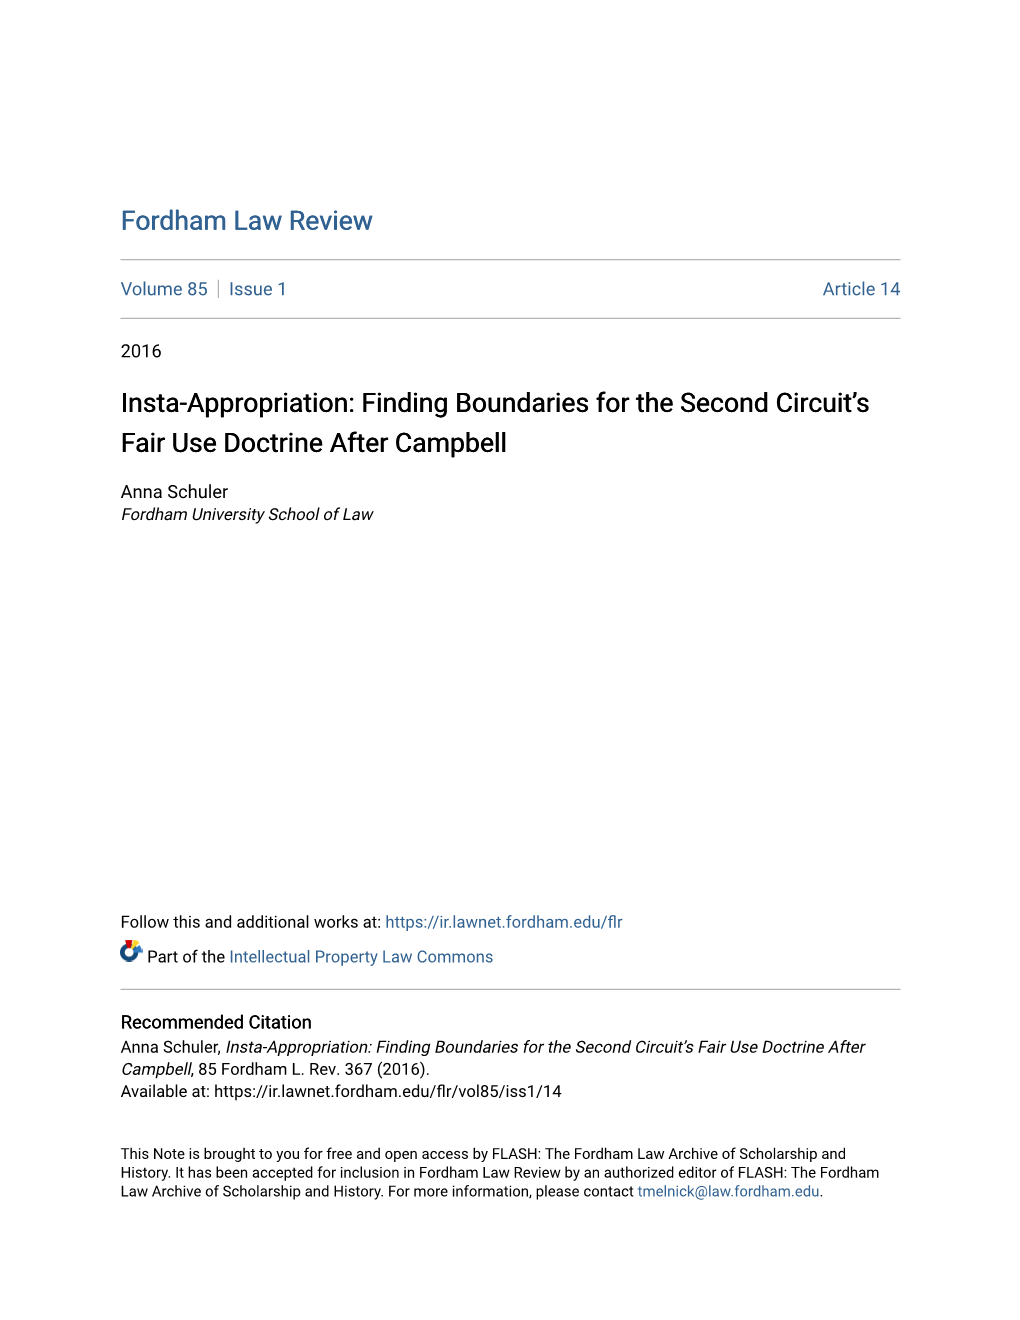 Insta-Appropriation: Finding Boundaries for the Second Circuit’S Fair Use Doctrine After Campbell